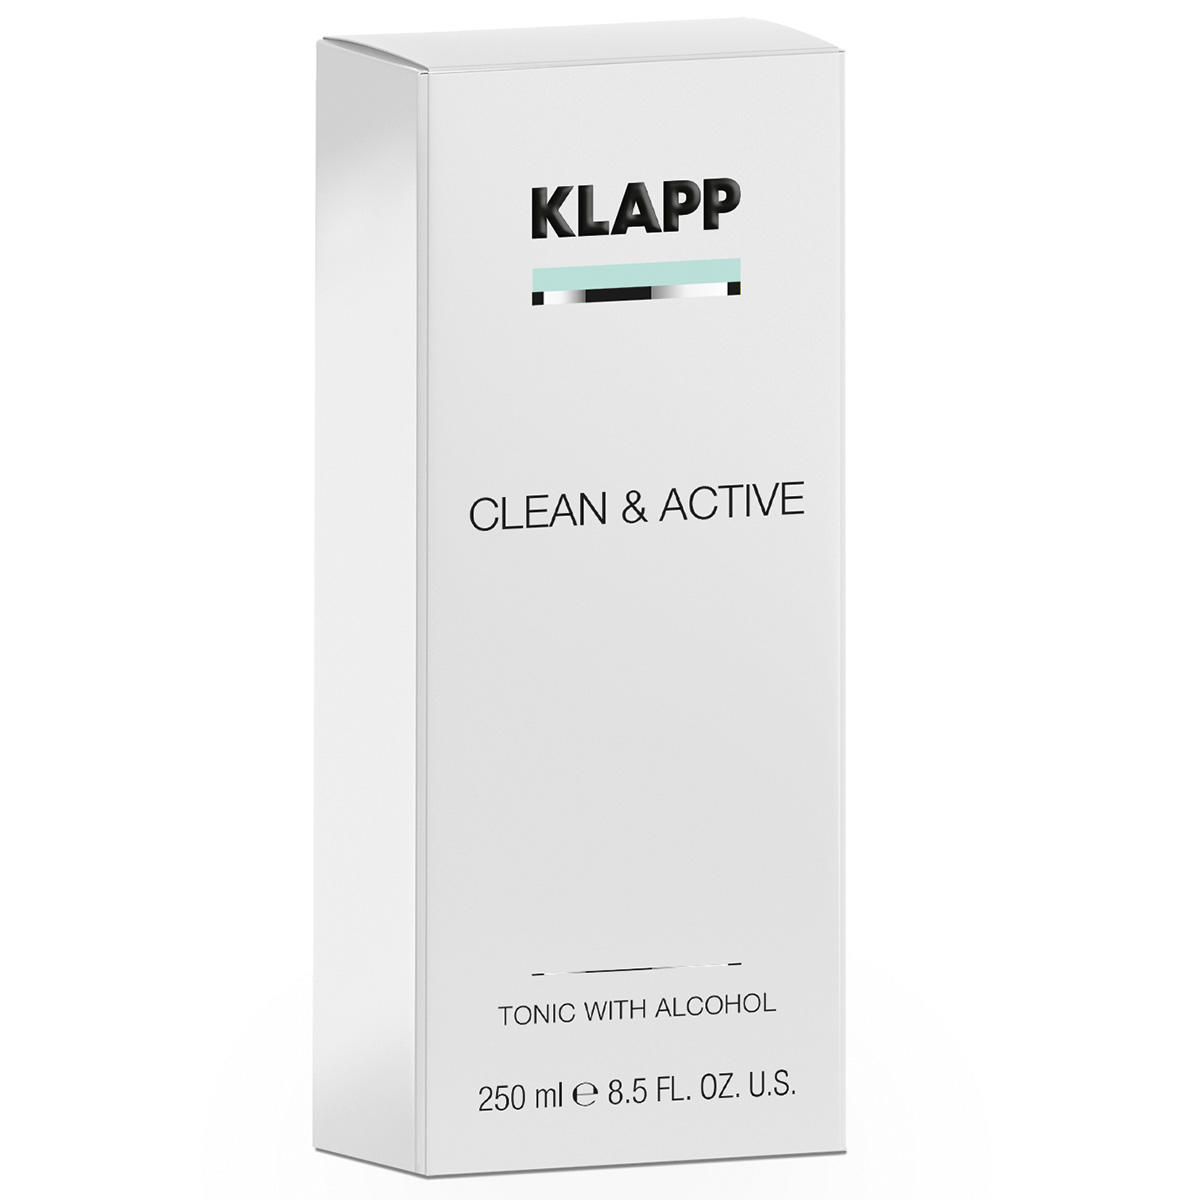 KLAPP CLEAN & ACTIVE Tonic with Alcohol 250 ml - 2